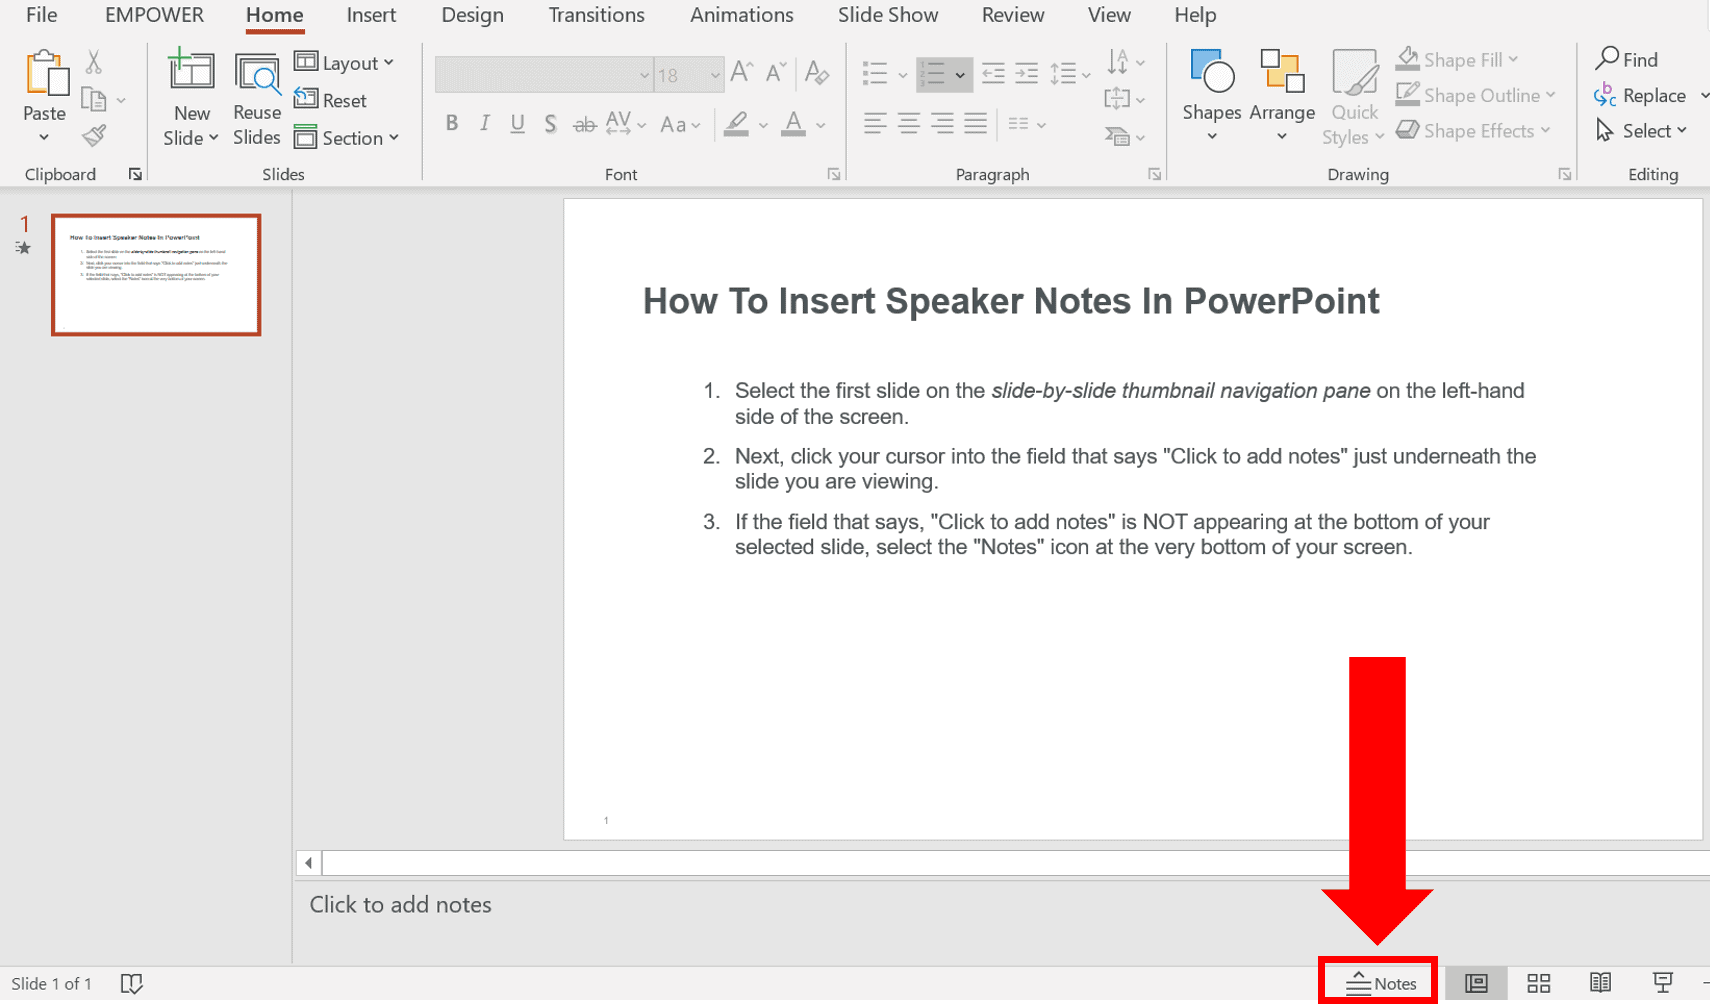 Notes button to add speaker notes in PowerPoint